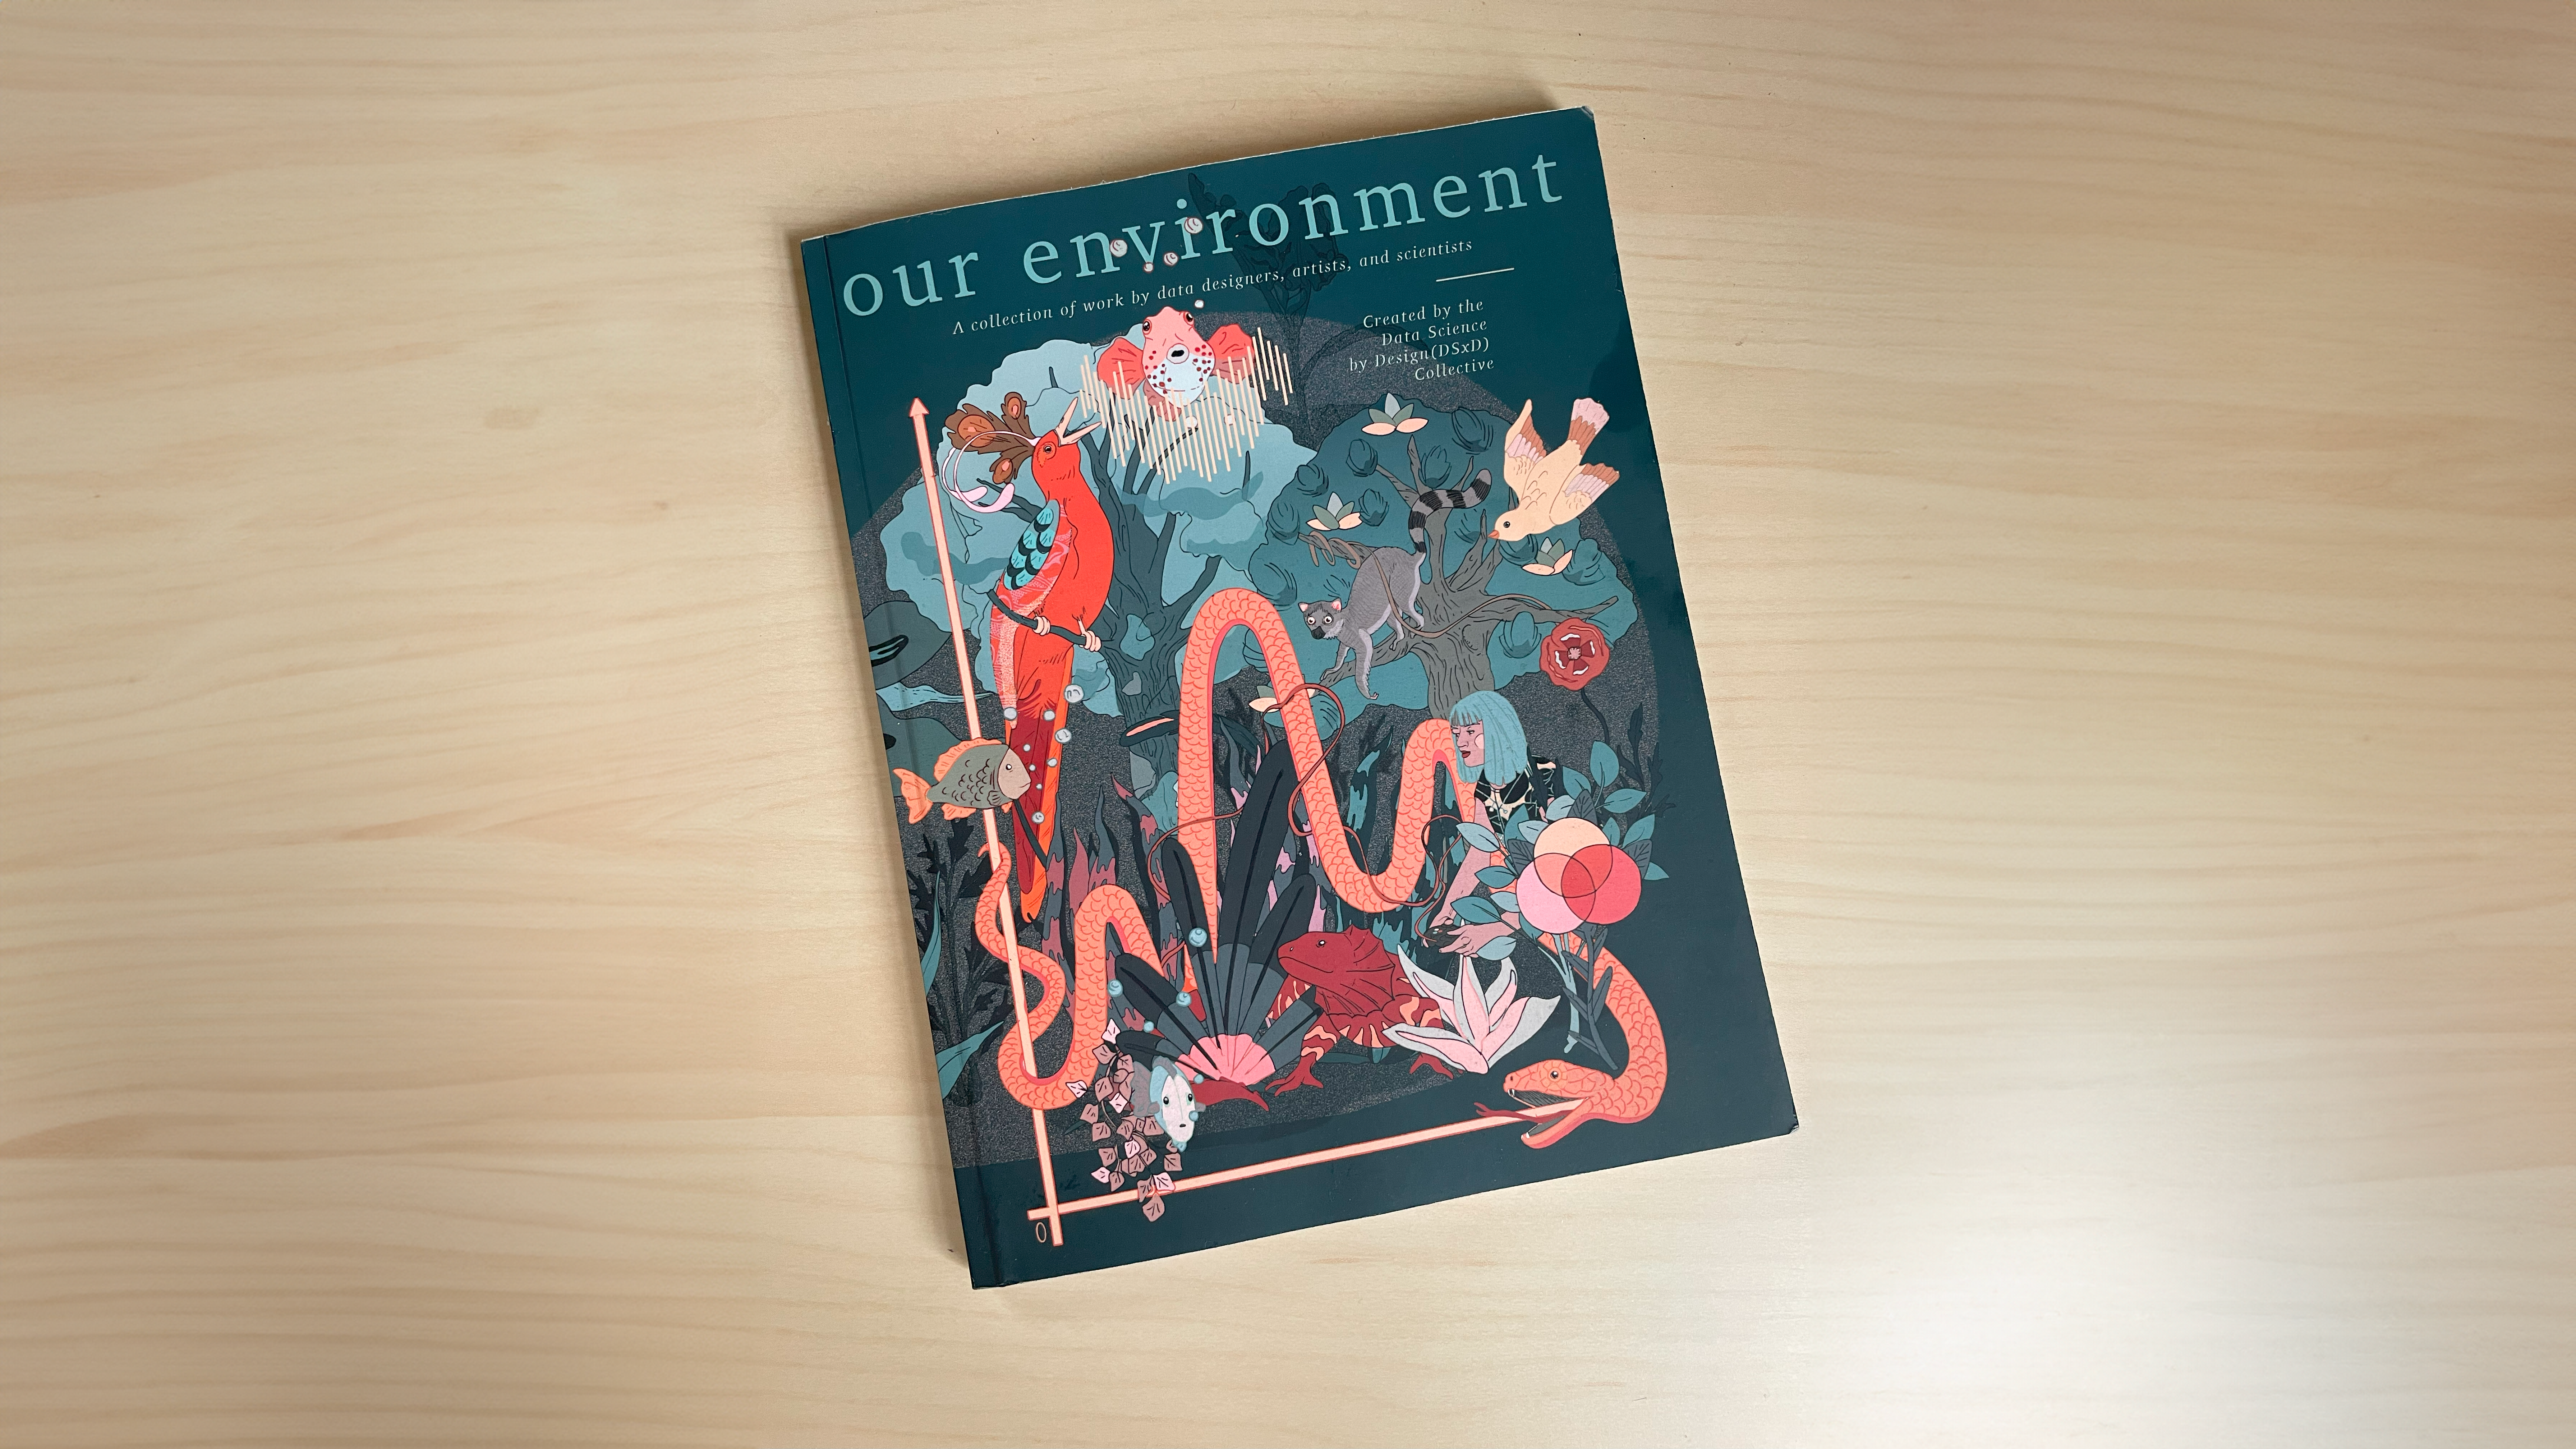 A highly illustrated book cover sitting on a wooden table with the title "our environment"